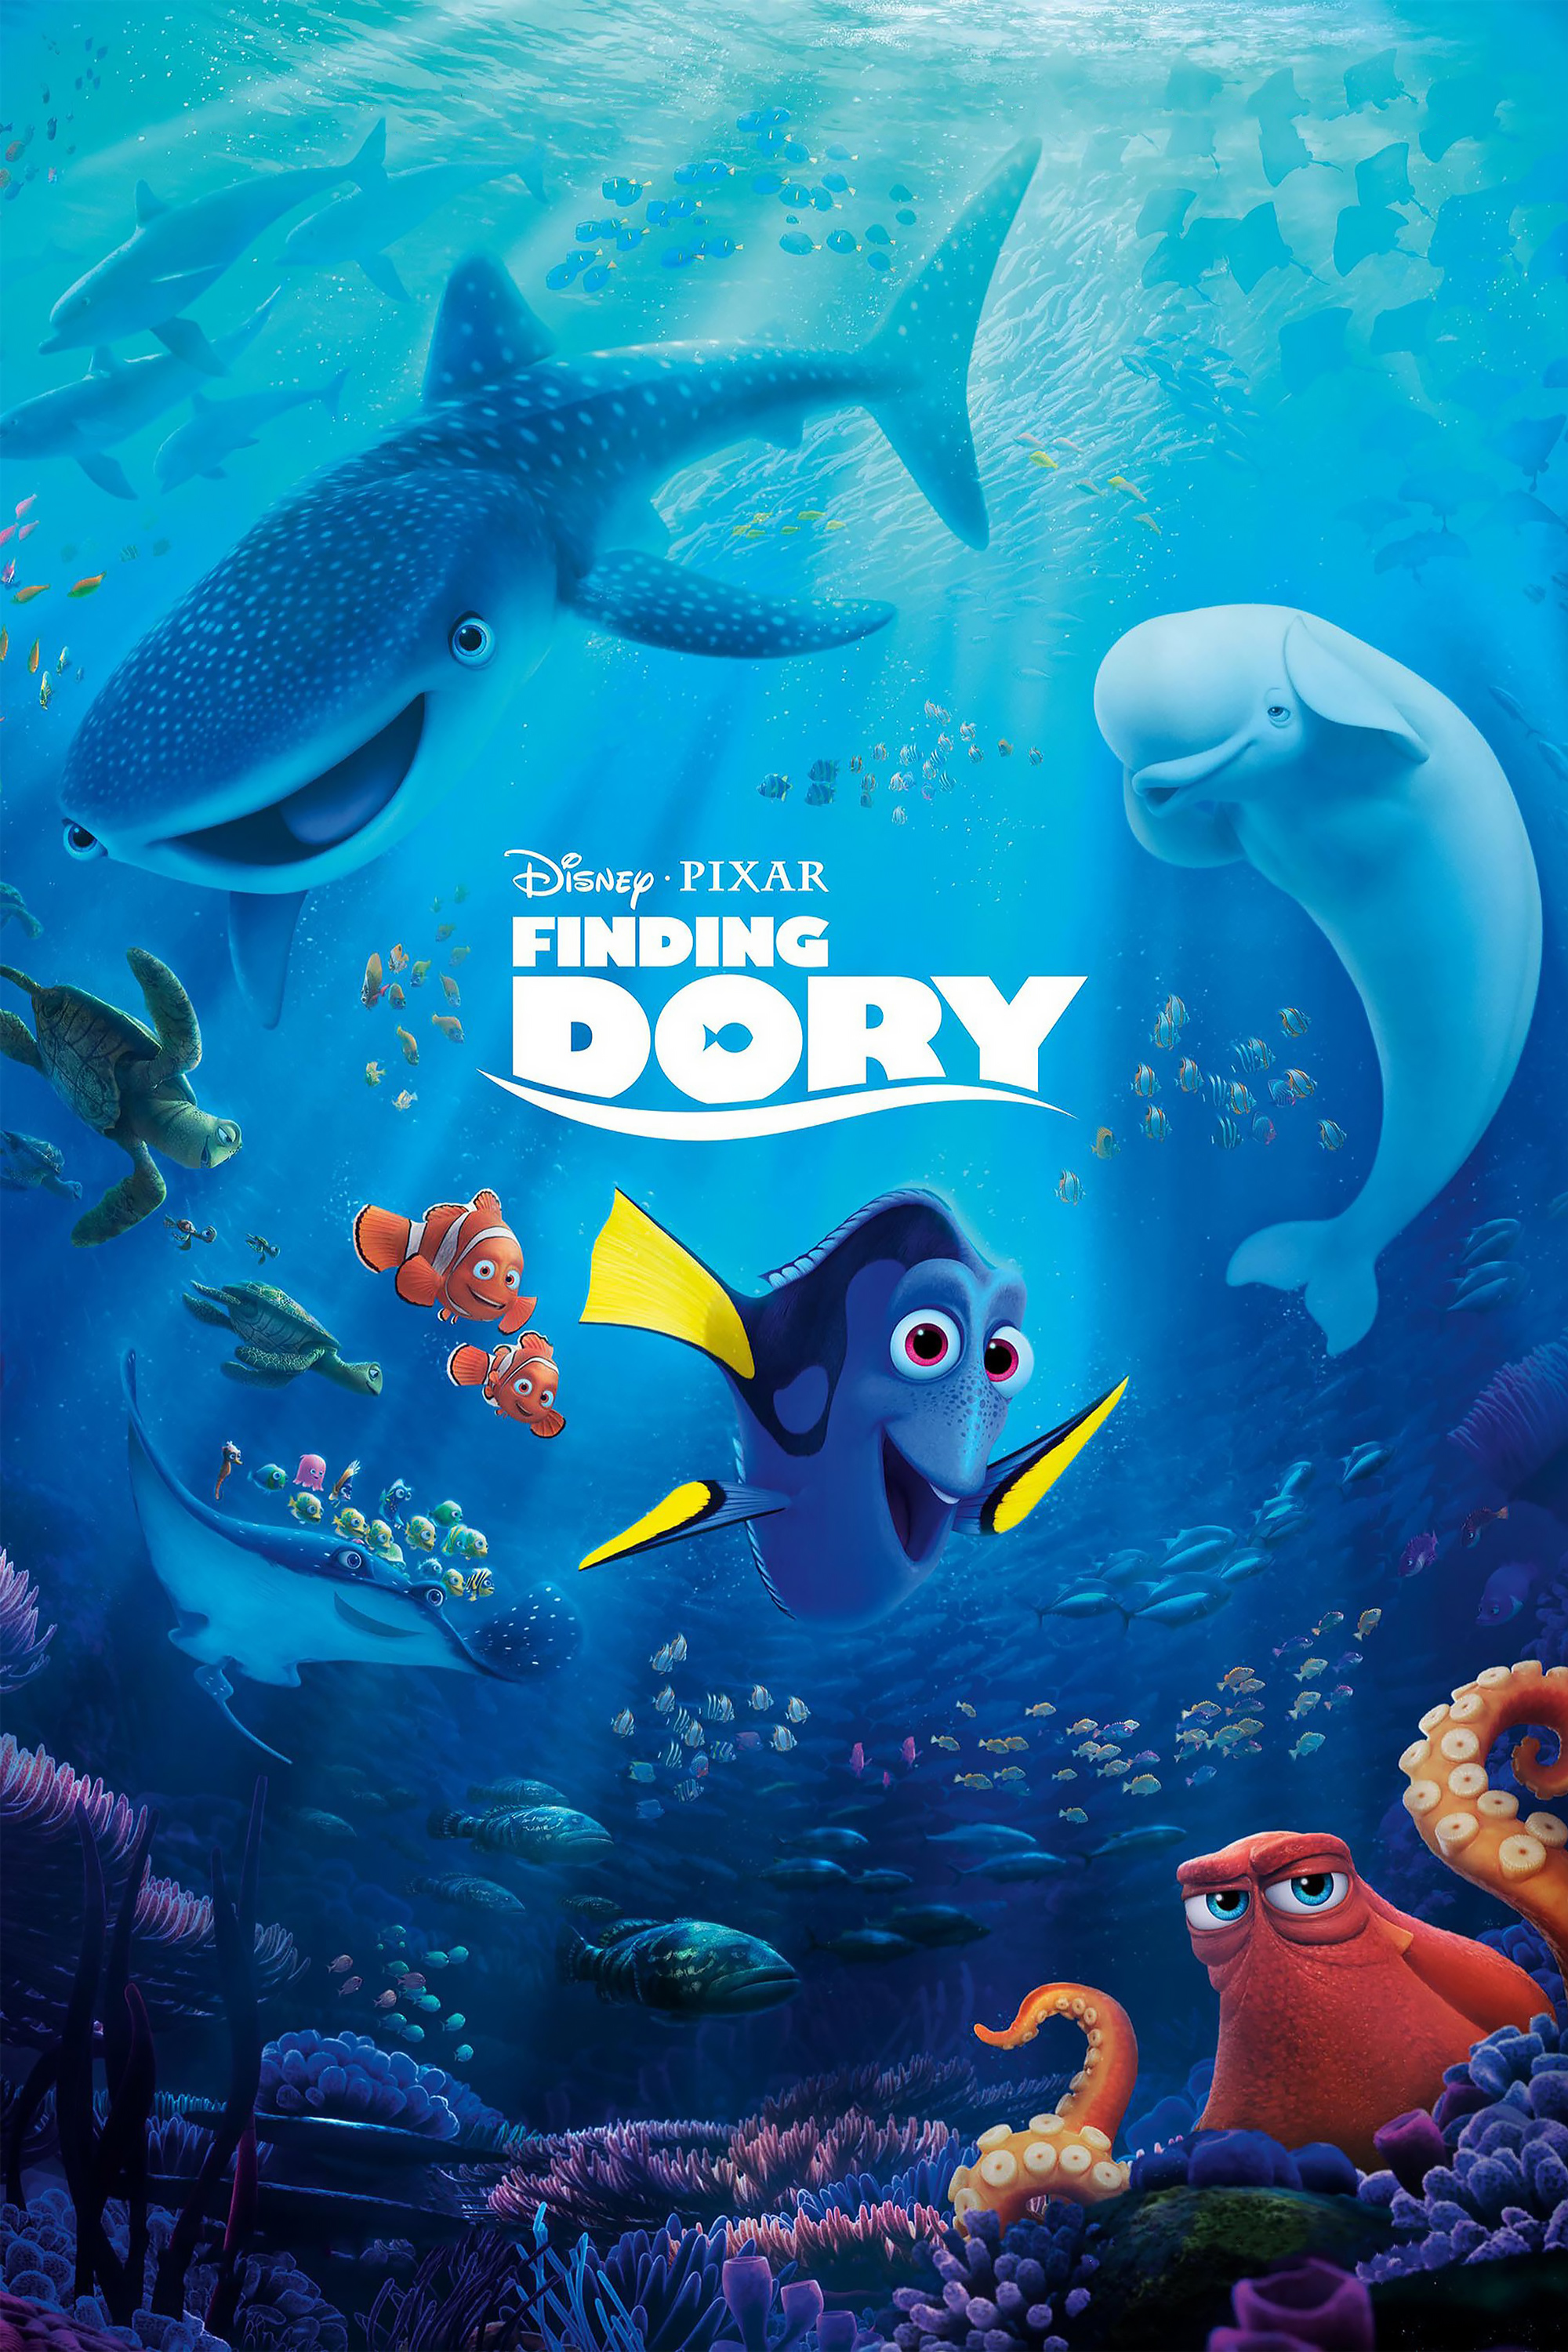 Finding Dory (2016) ★★★☆☆